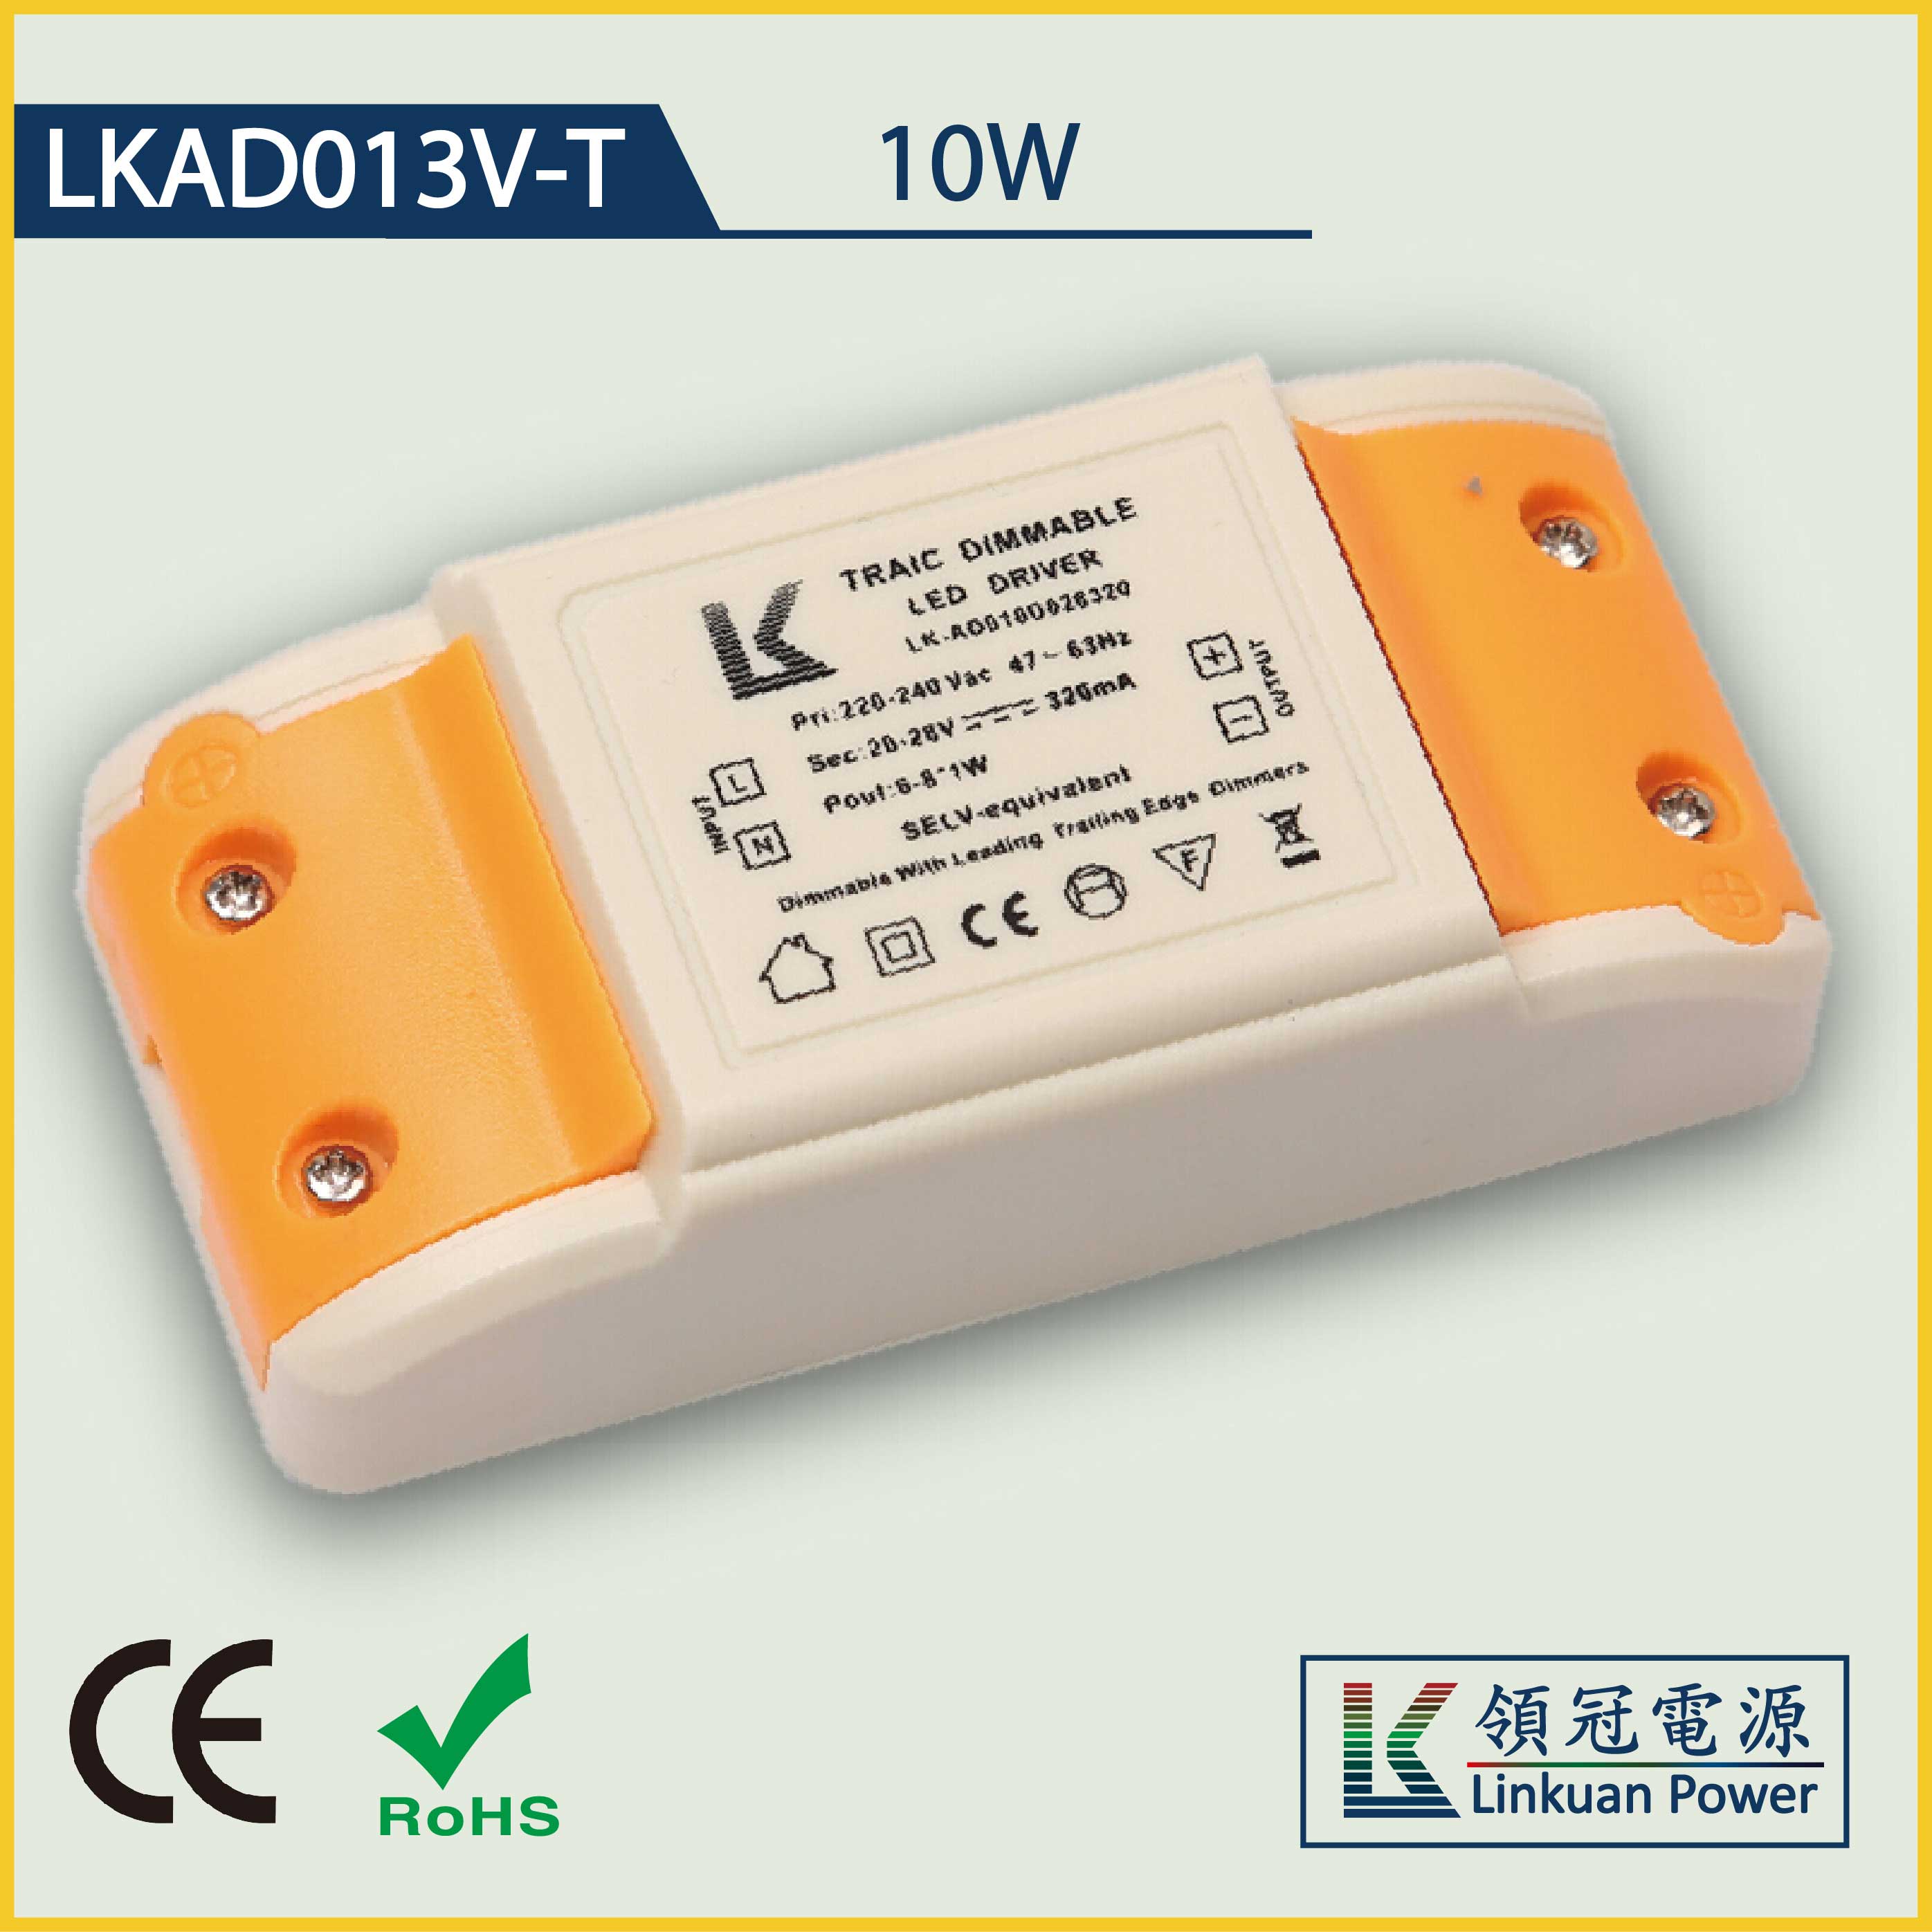 LKAD013V-T 10W constant voltage 12/24V 800/400mA triac dimmable led driver